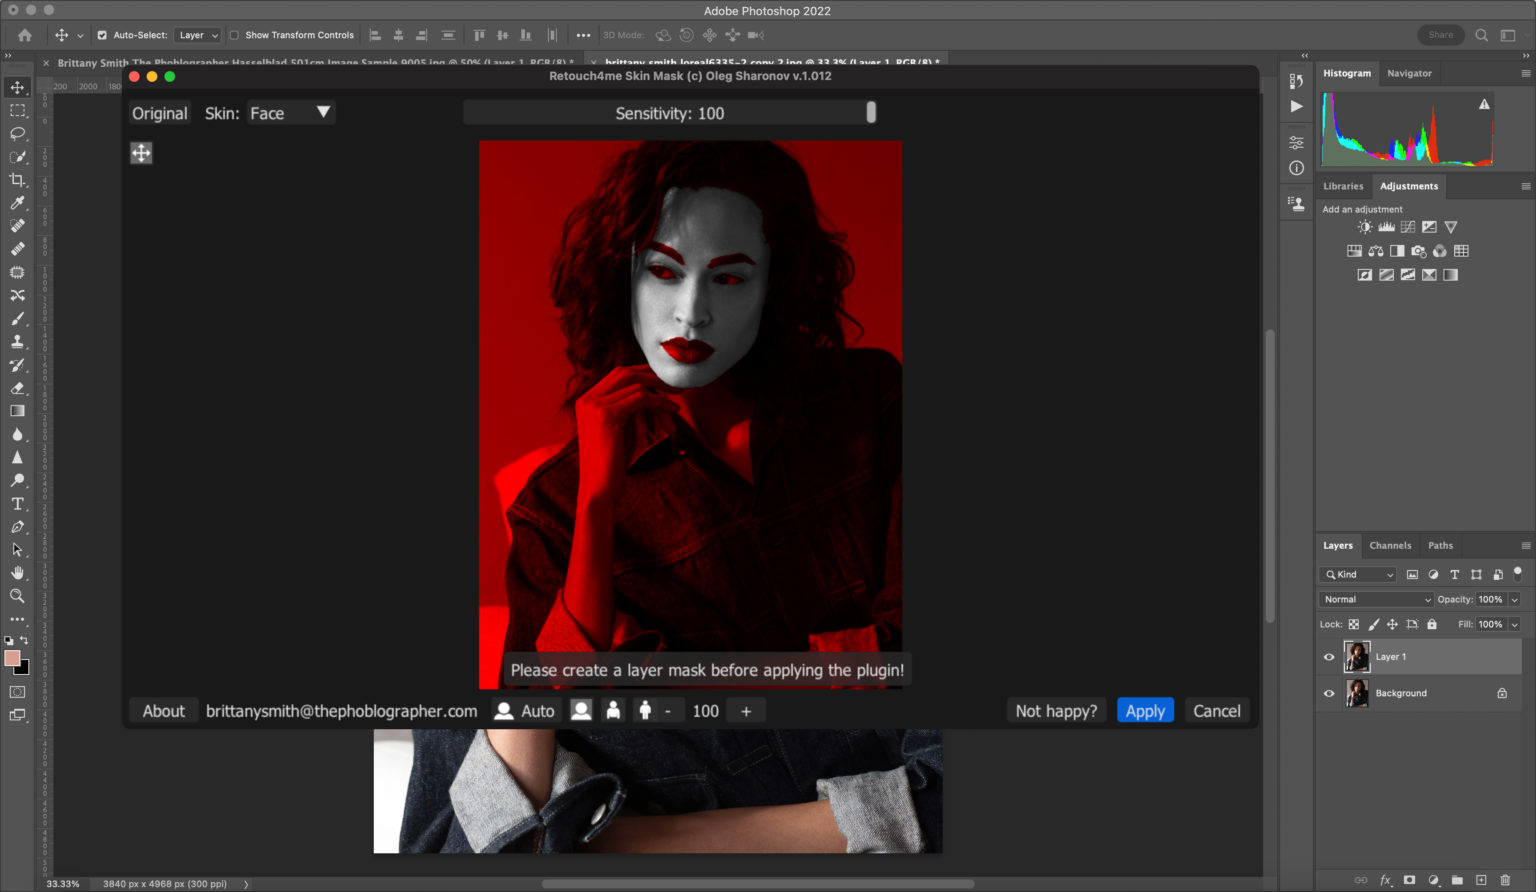 download the new Retouch4me Skin Mask 1.019